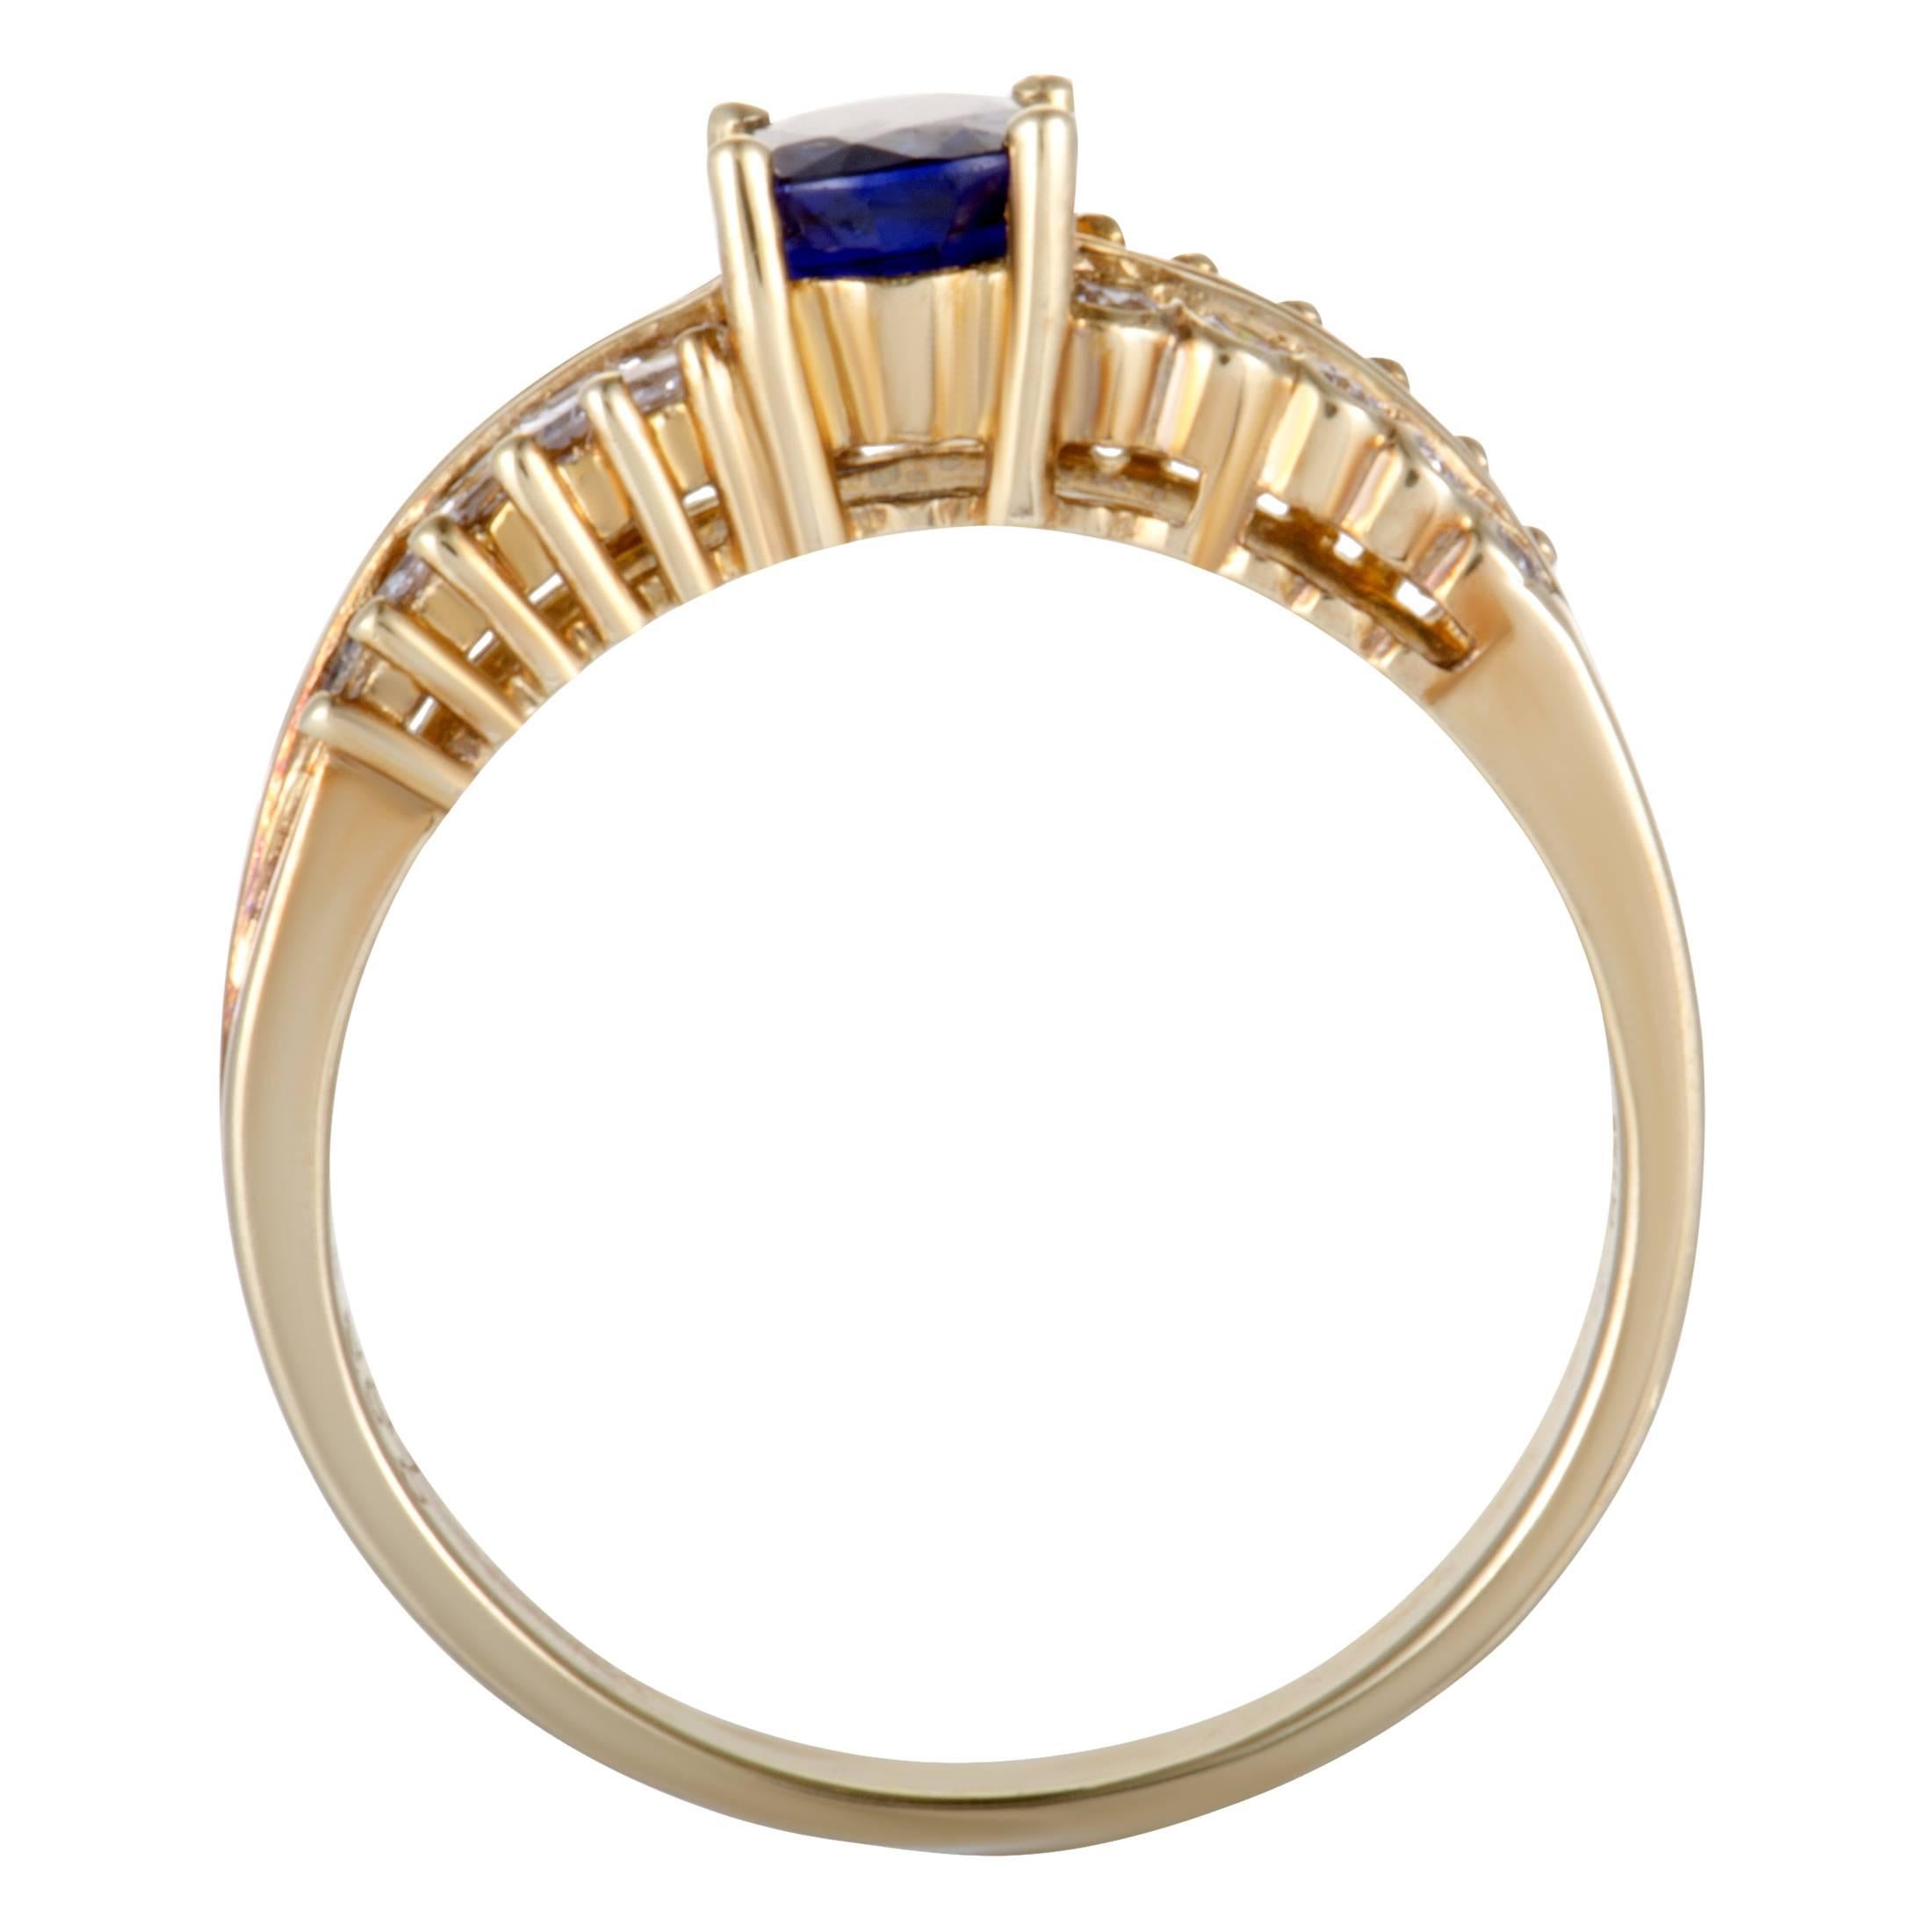 The very essence of prestigious excellence is embodied in this sumptuous ring that features a compellingly classy design and is made of luxurious 18K yellow gold. The ring is set with diversely cut diamond stones that amount to 0.56 carats and